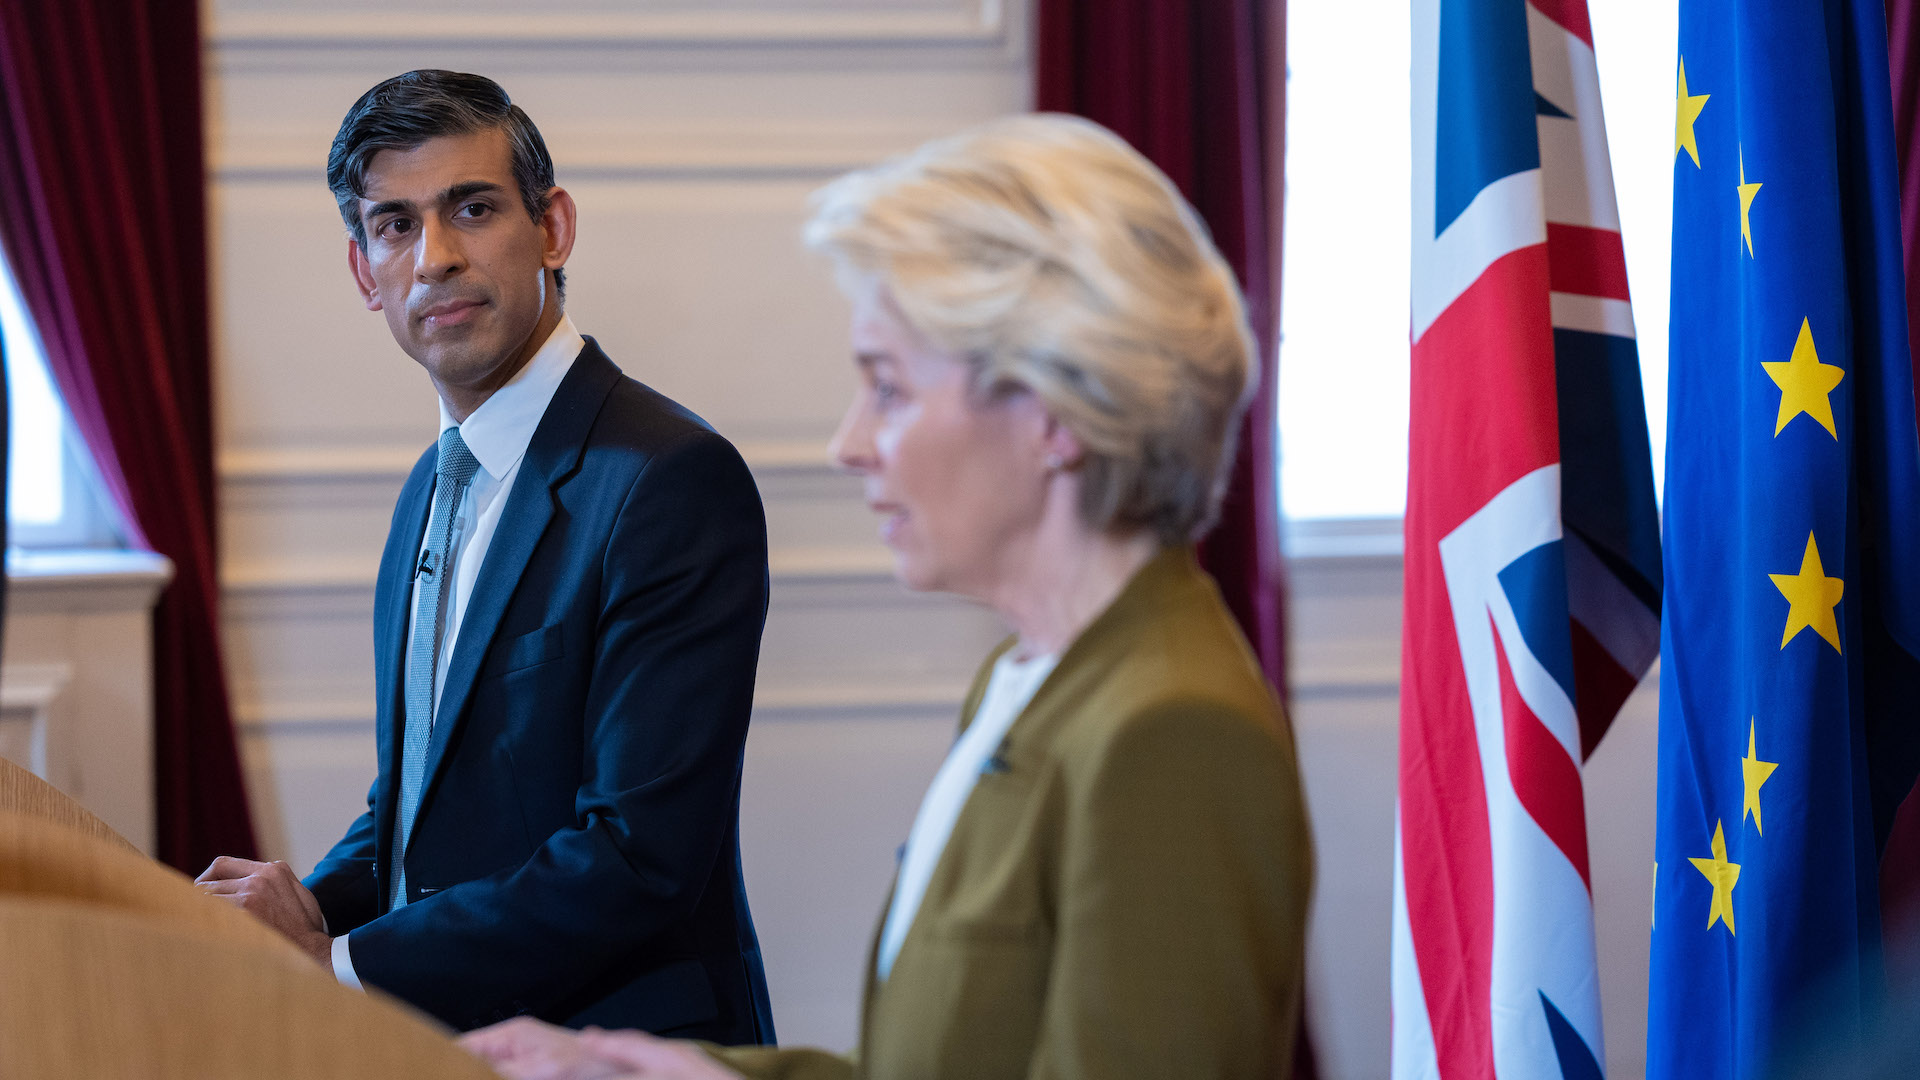 Rishi Sunak stands in front of a lectern and looks at Ursula von der Leyen, who is speaking at her lectern